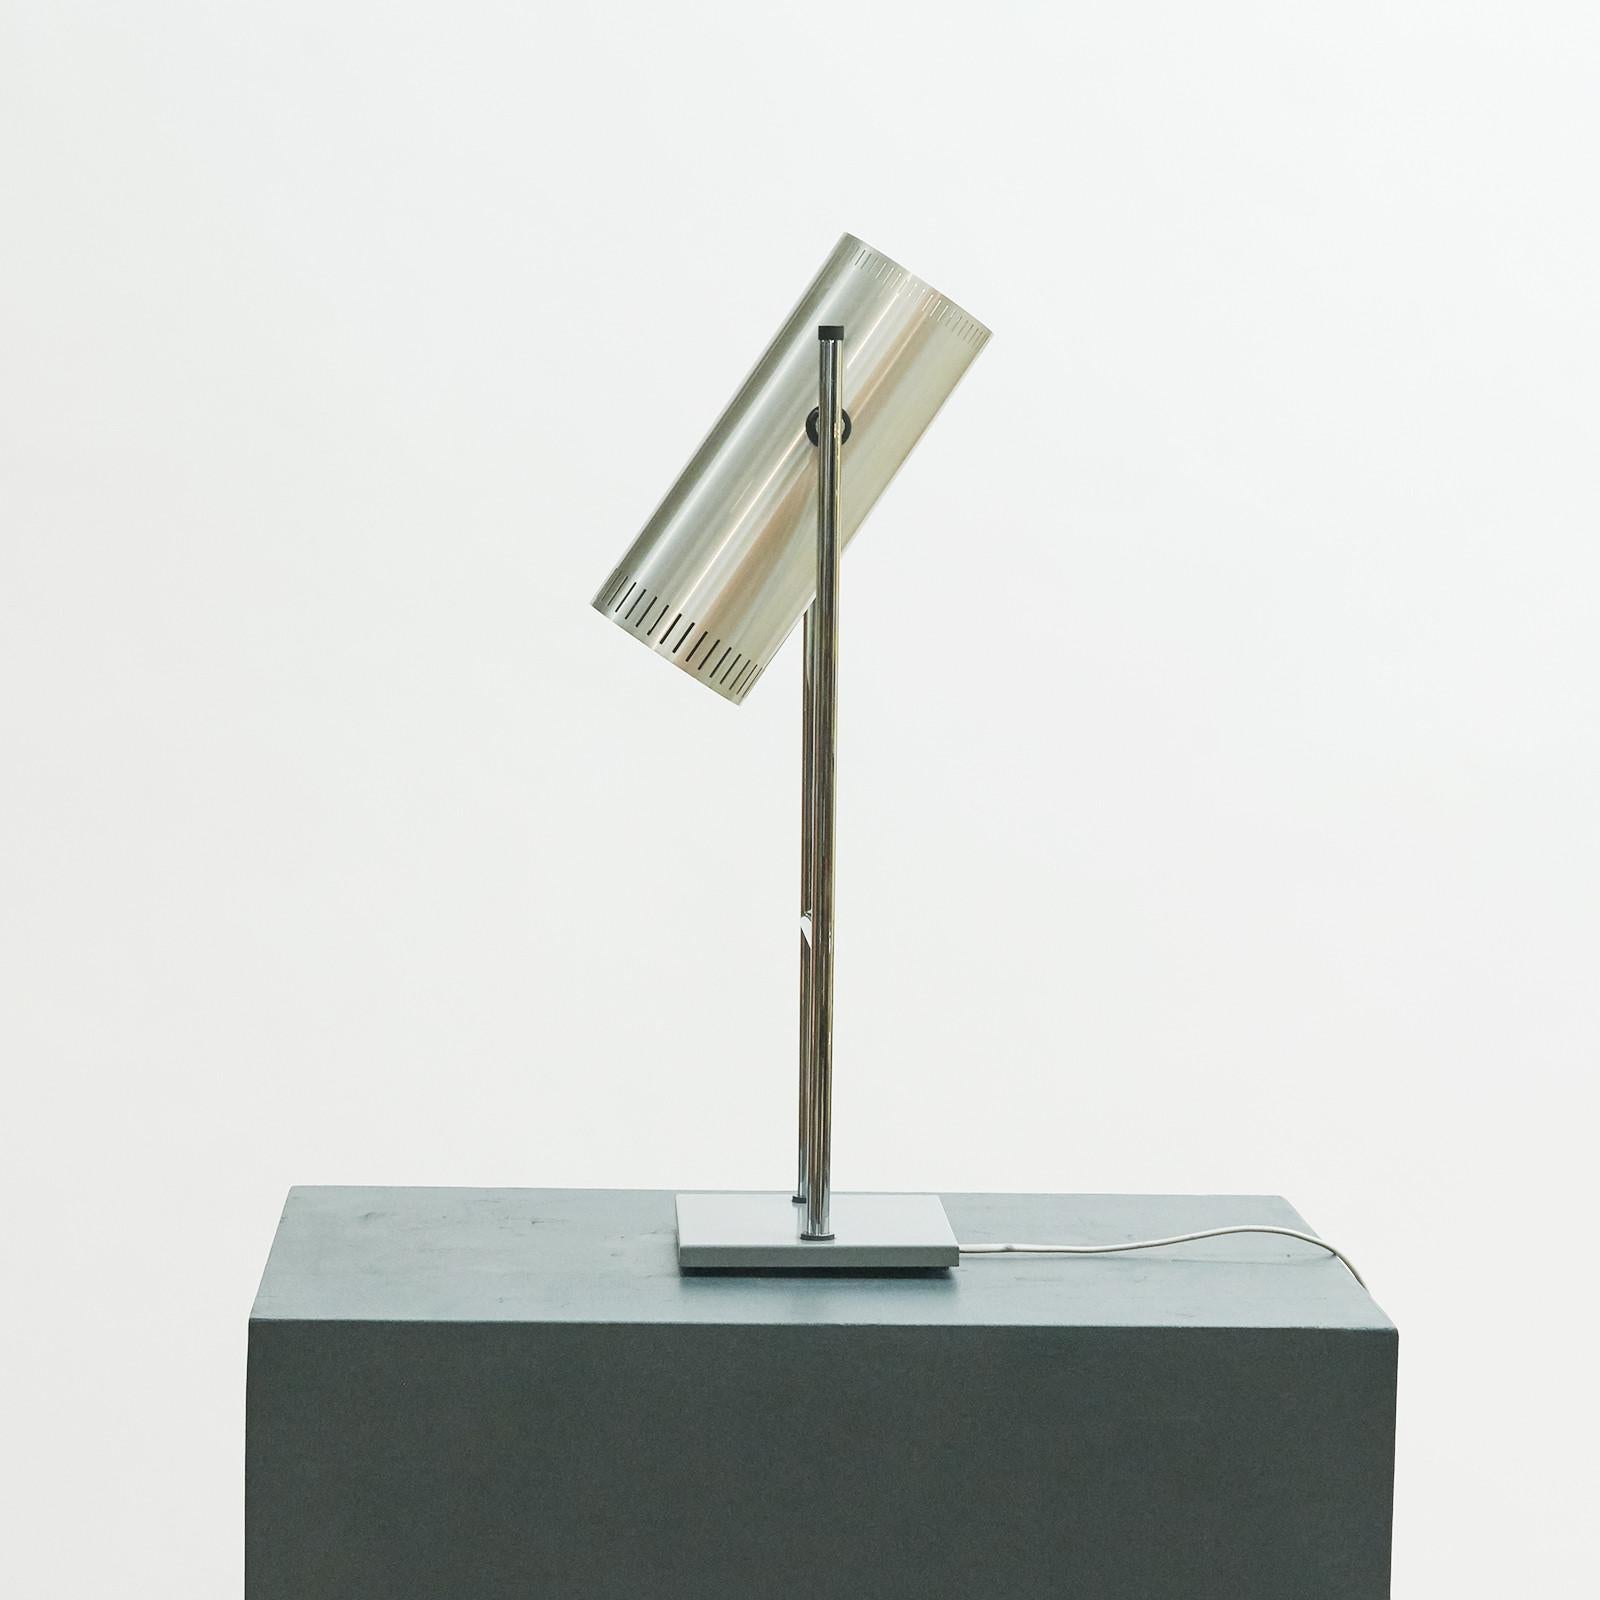 *Trombone' aluminum table / desk lamp by Jo Hammerborg for Fog & Mørup from the 1960s. 
A sleek shaped desk lamp with a square metal base, from where two aluminum lacquered stems emerge, connected by a 